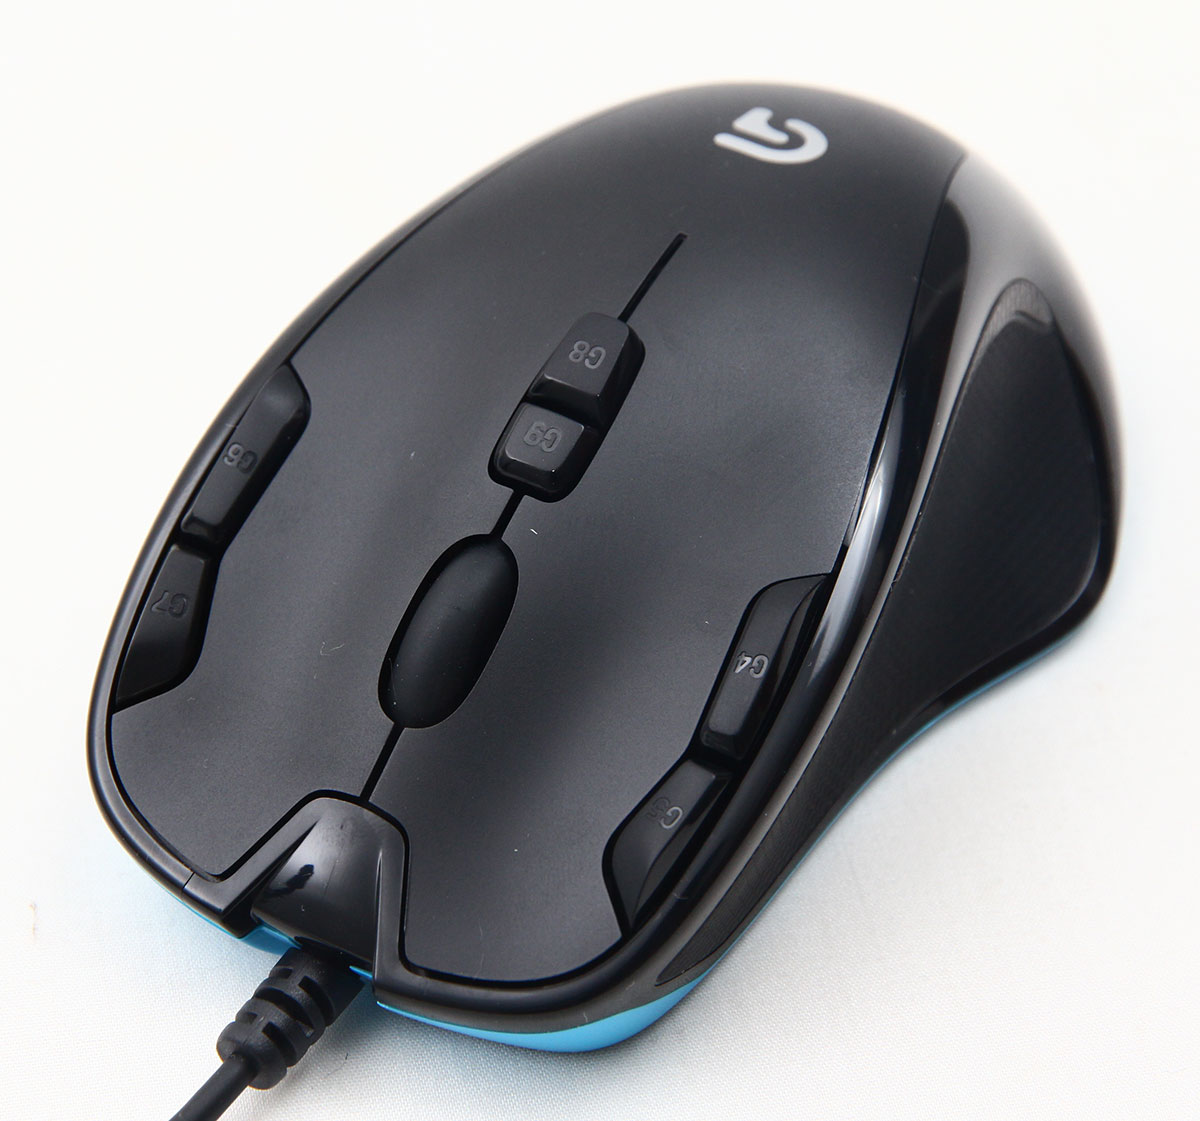 Logitech G300s Gaming Mouse Review